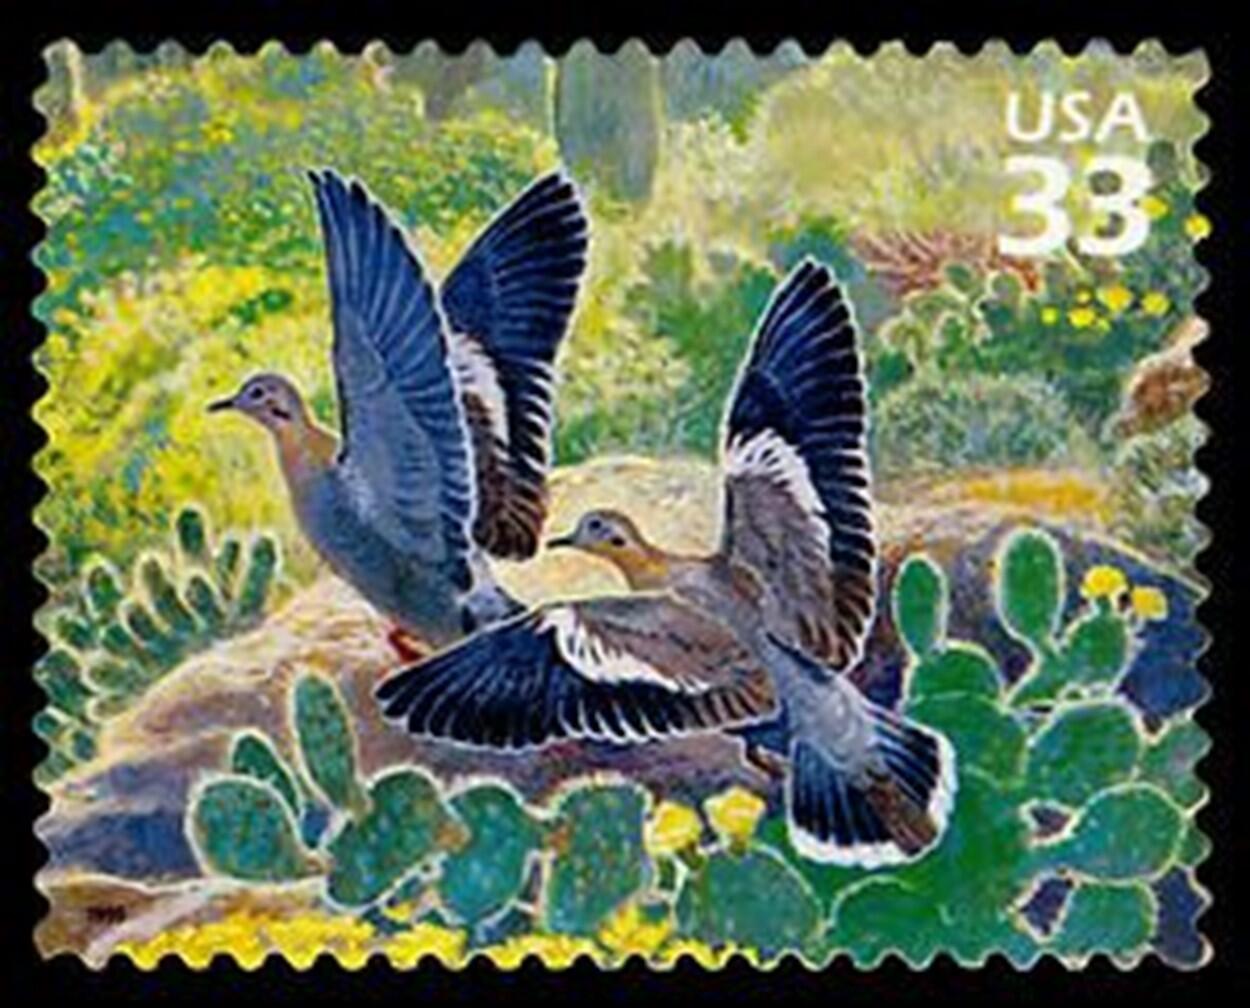 postage stamp with two white winged doves with a desert background